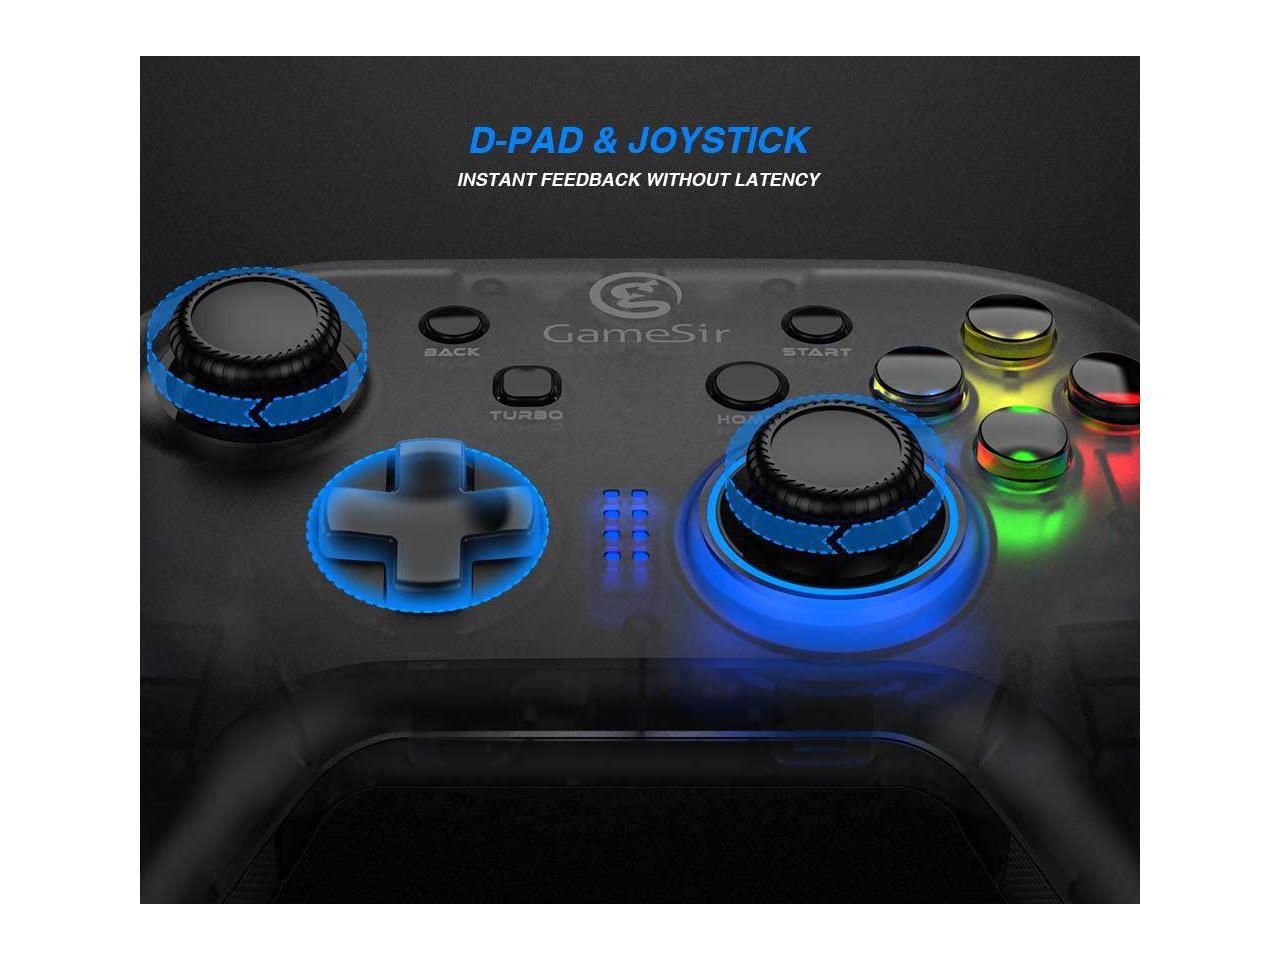 GameSir T4W PC Controller Wired Game Controller for Windows 10/8.1/8/7 Dual Shock Game Gamepad, USB Gamepad with LED Backlight Joystick Vibration Feedback, Semi-Transparent Design Newegg.com